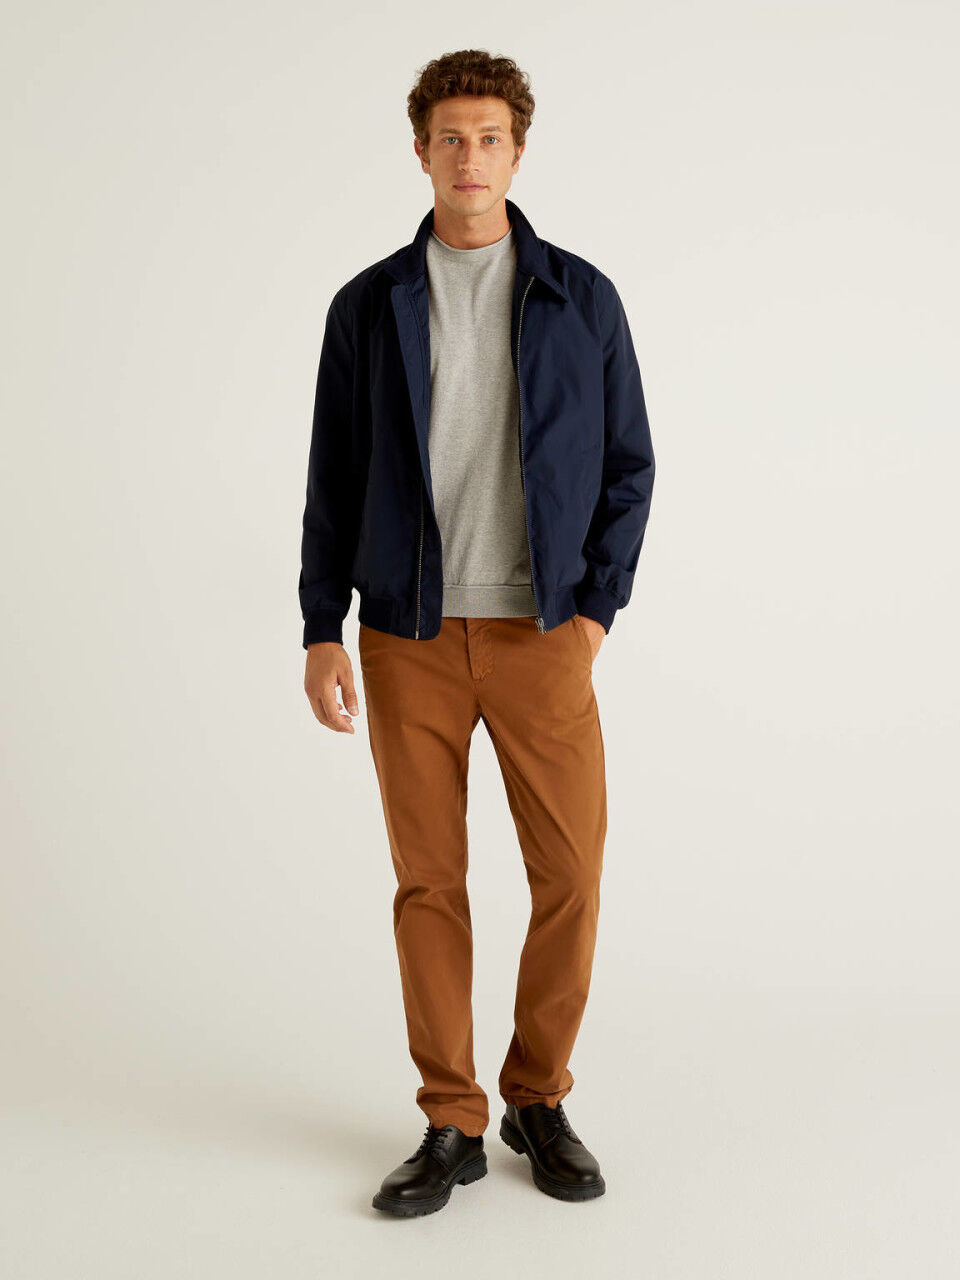 Men's Coats and Jackets Collection 2021 | Benetton